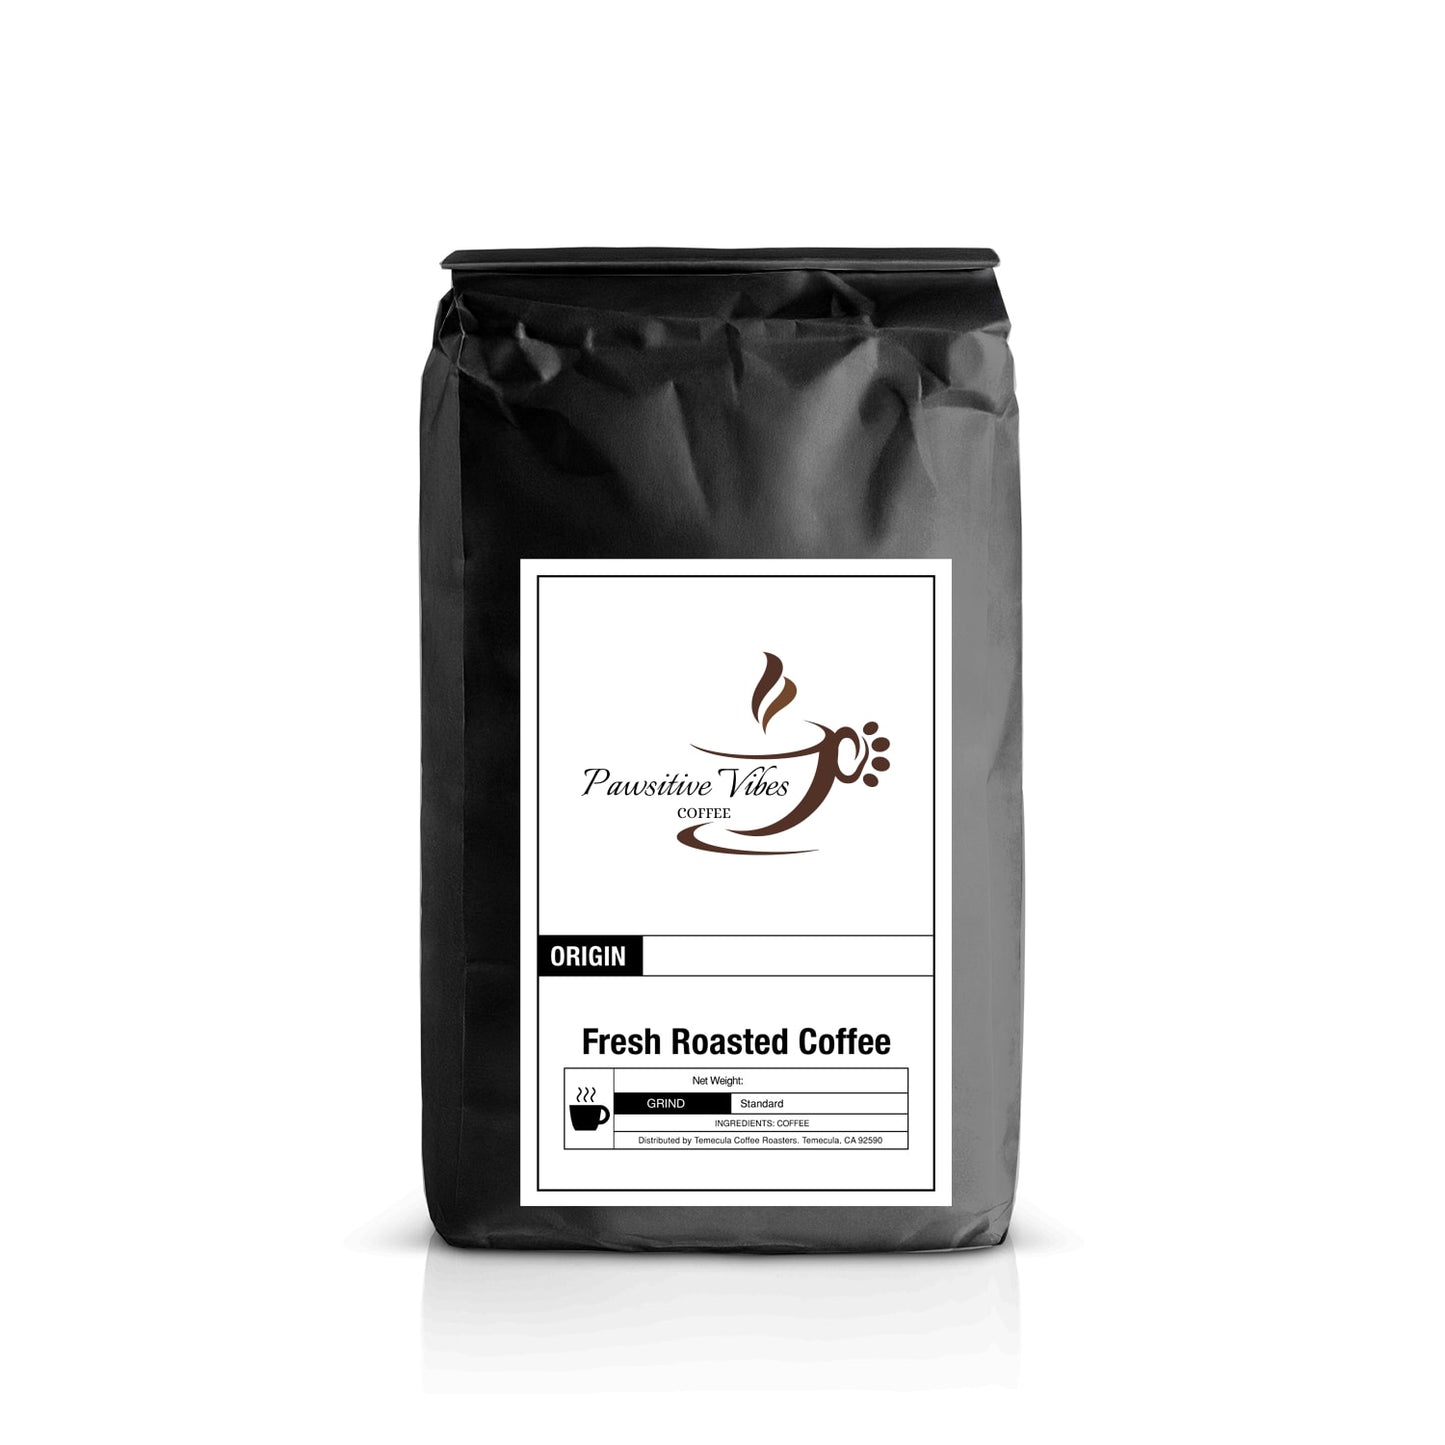 Deliciously Smooth Medium Roast Coffee with All-Natural Sweet Buttery Caramel Flavor - Perfect for Blended Drinks